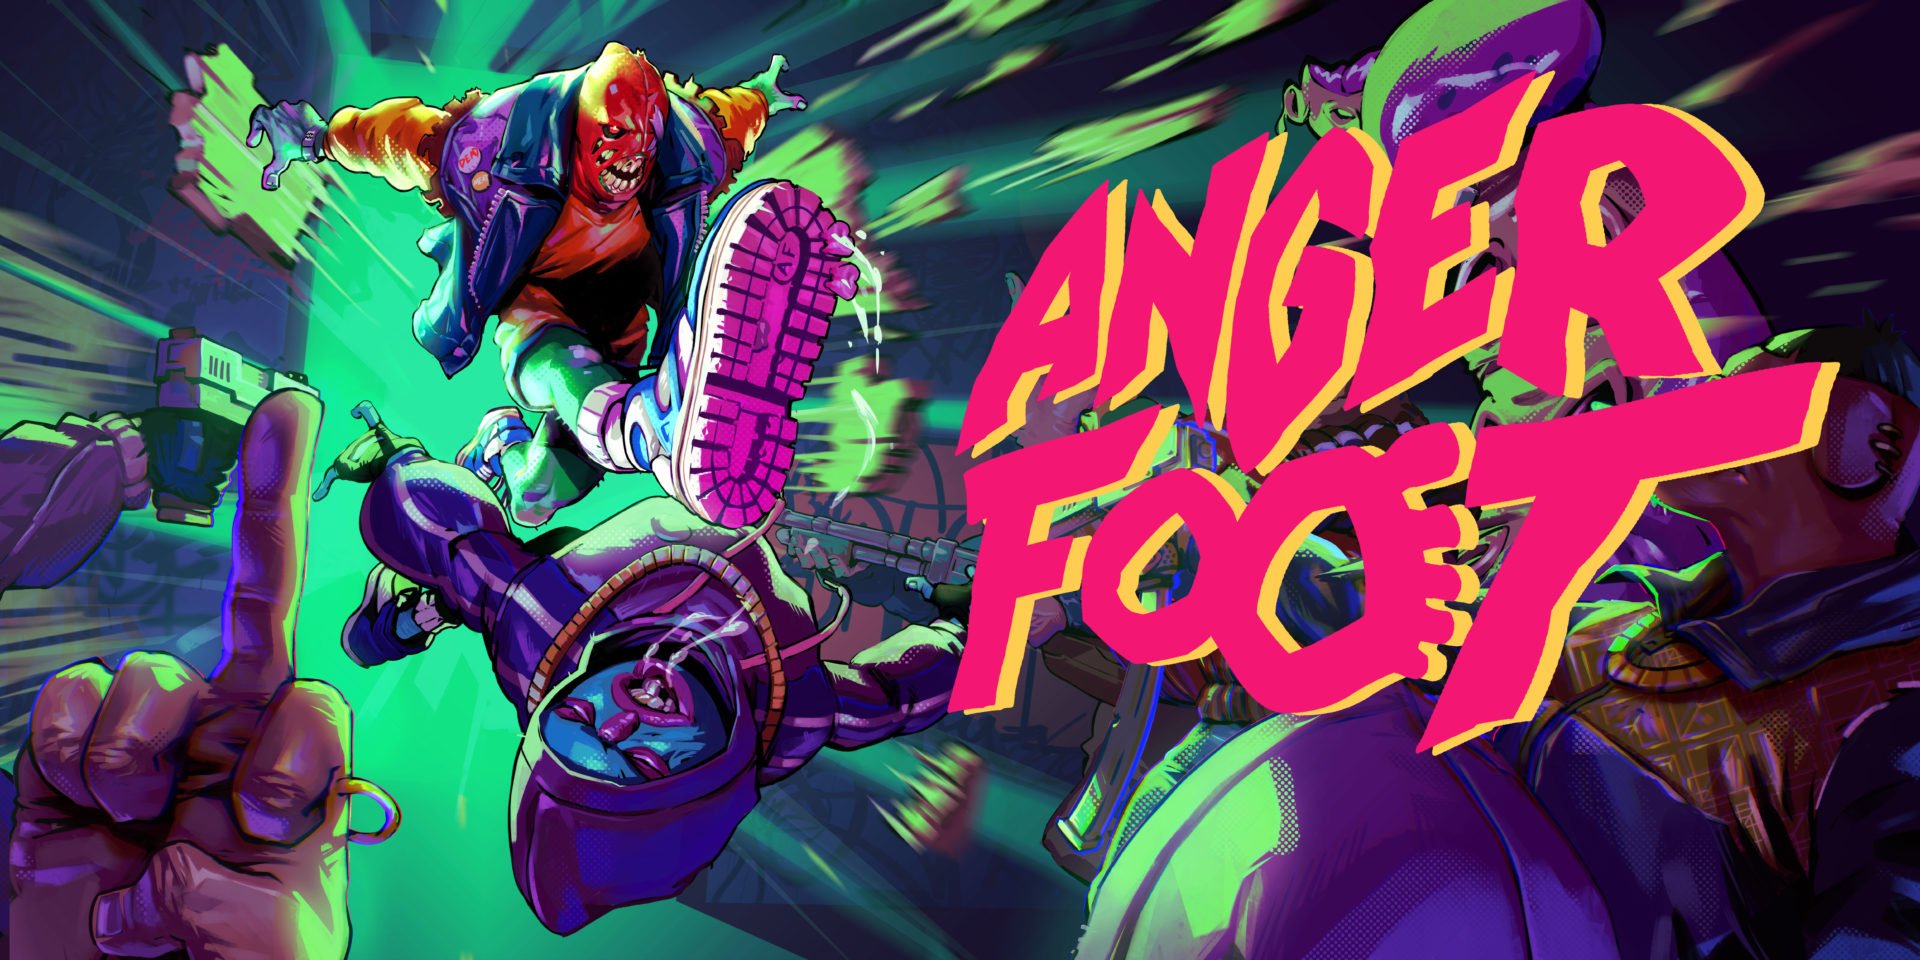 download anger foot pc